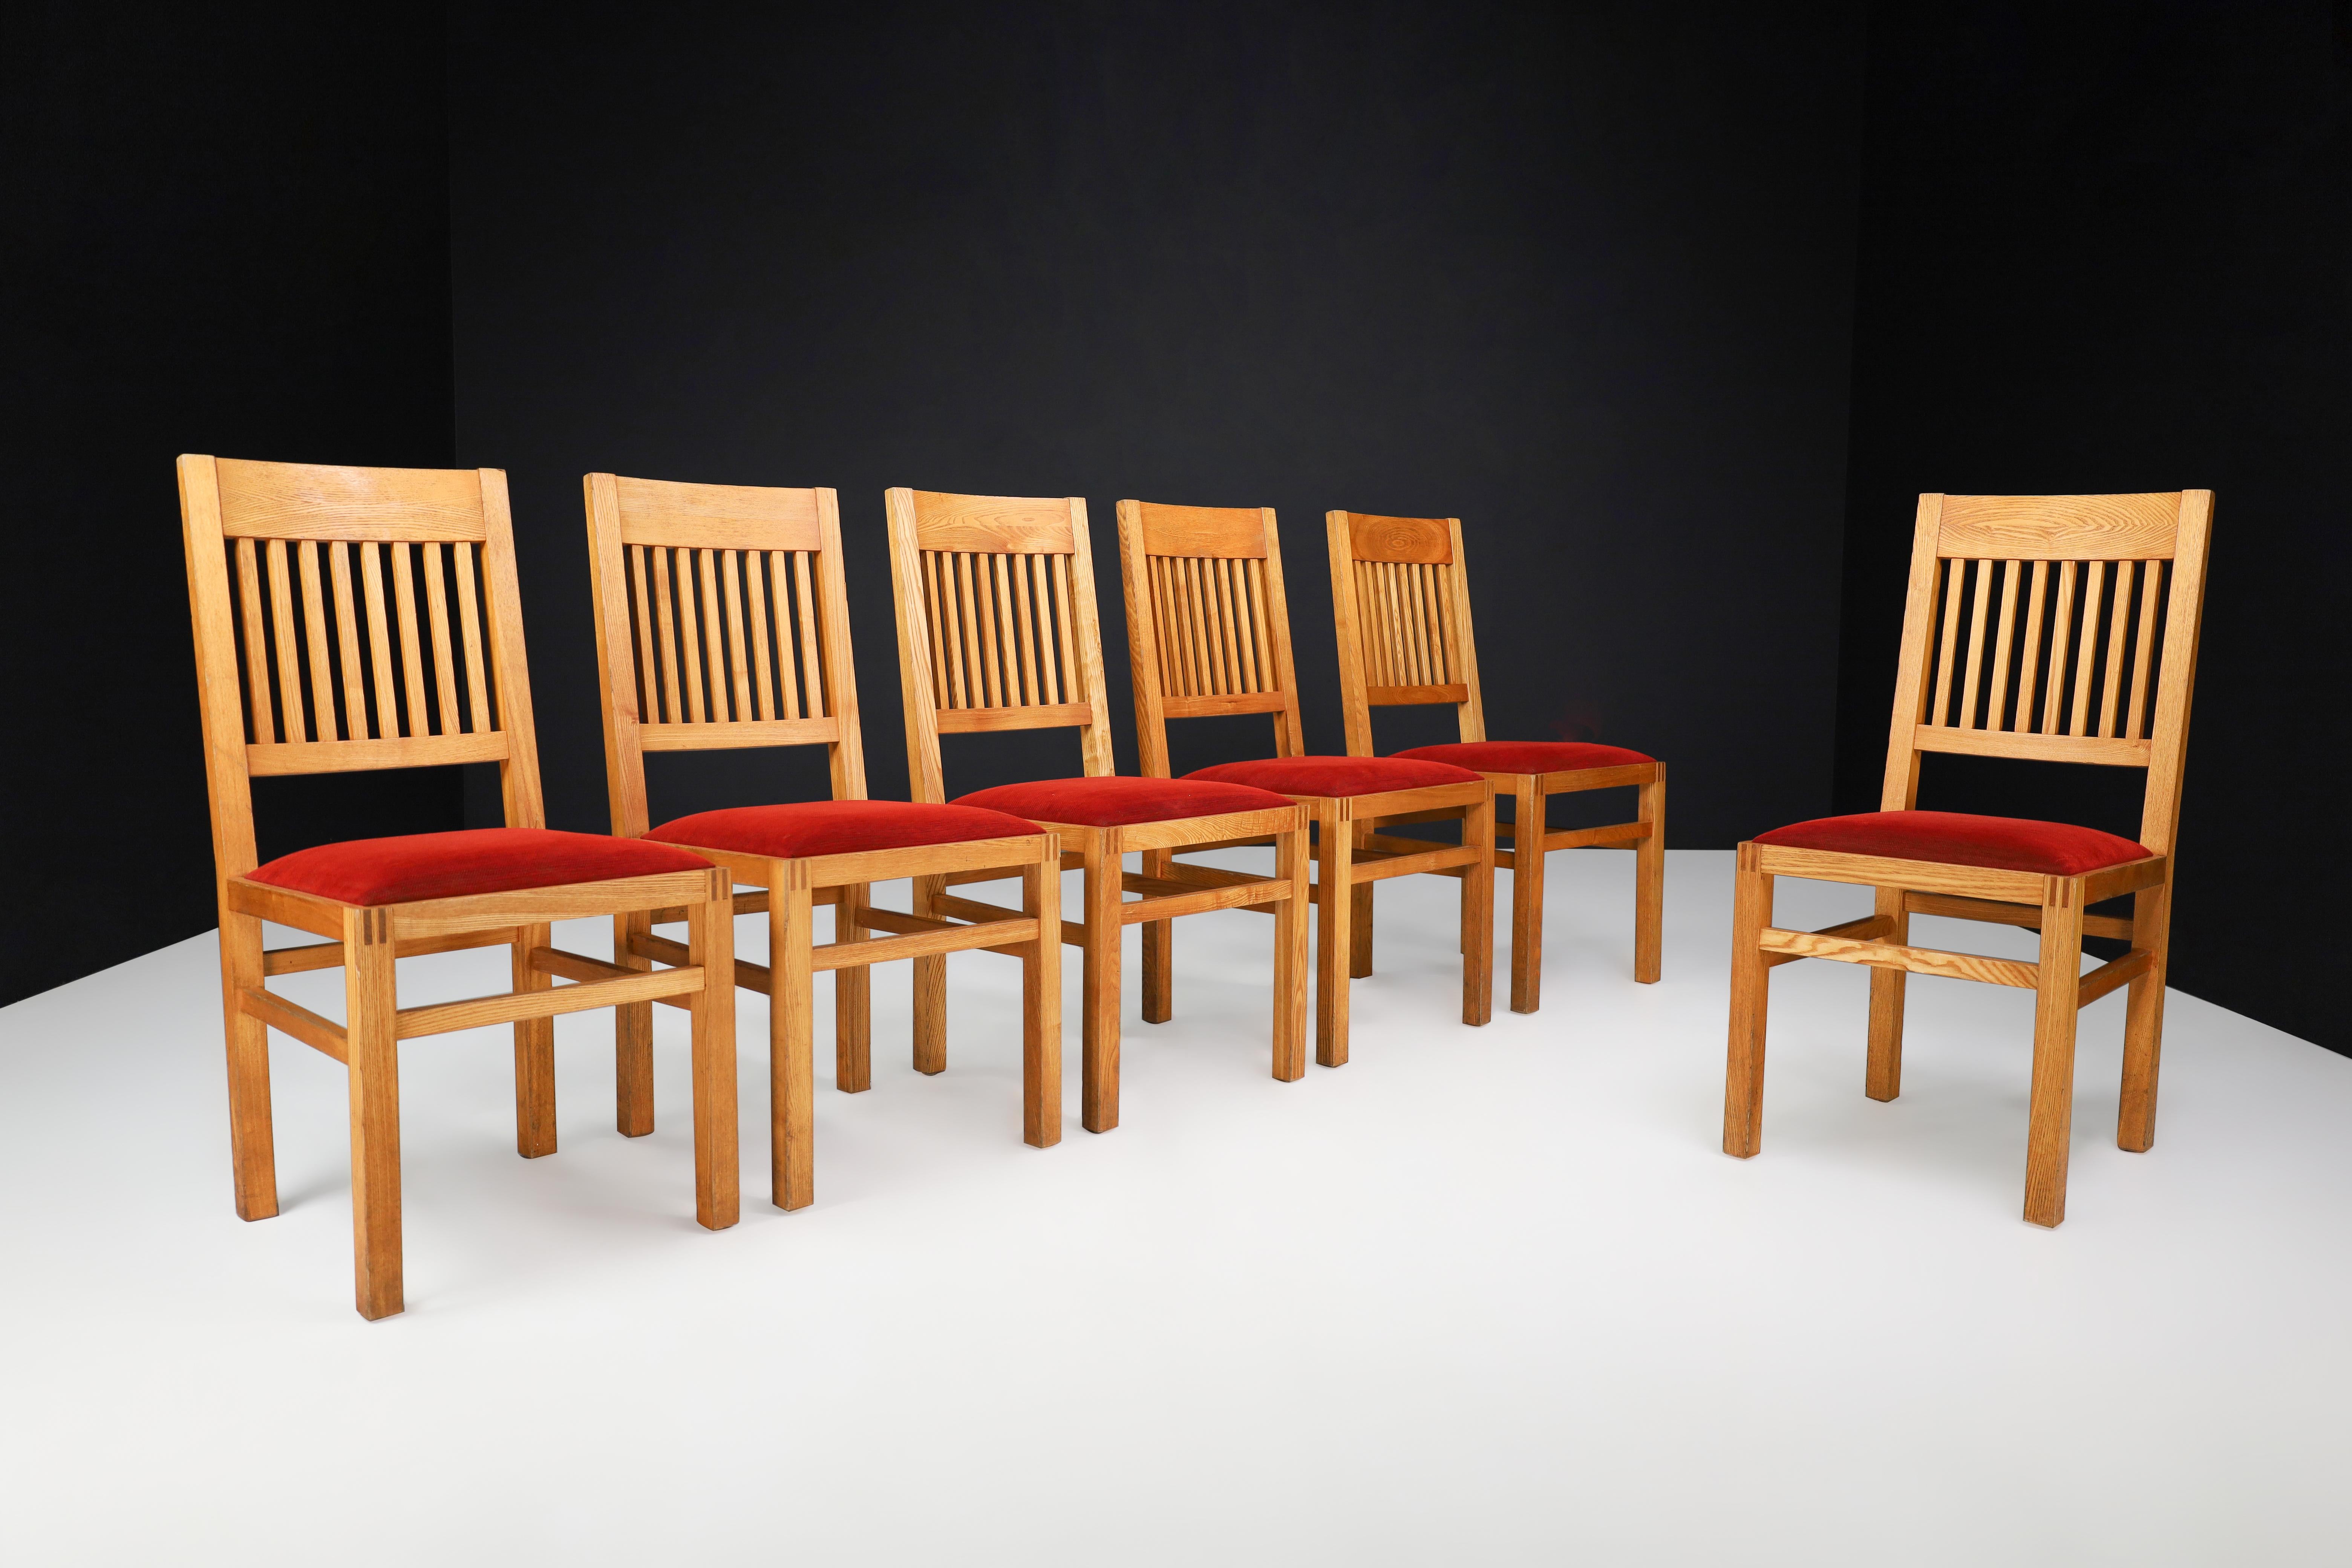 Blonde Oak and Crimson-red velvet dining room chairs, The Netherlands 1970s

This dining chair set is an absolutely stunning addition to any home, originating from the Netherlands in the 1970s. The chairs are made from exquisite blonde oak and are